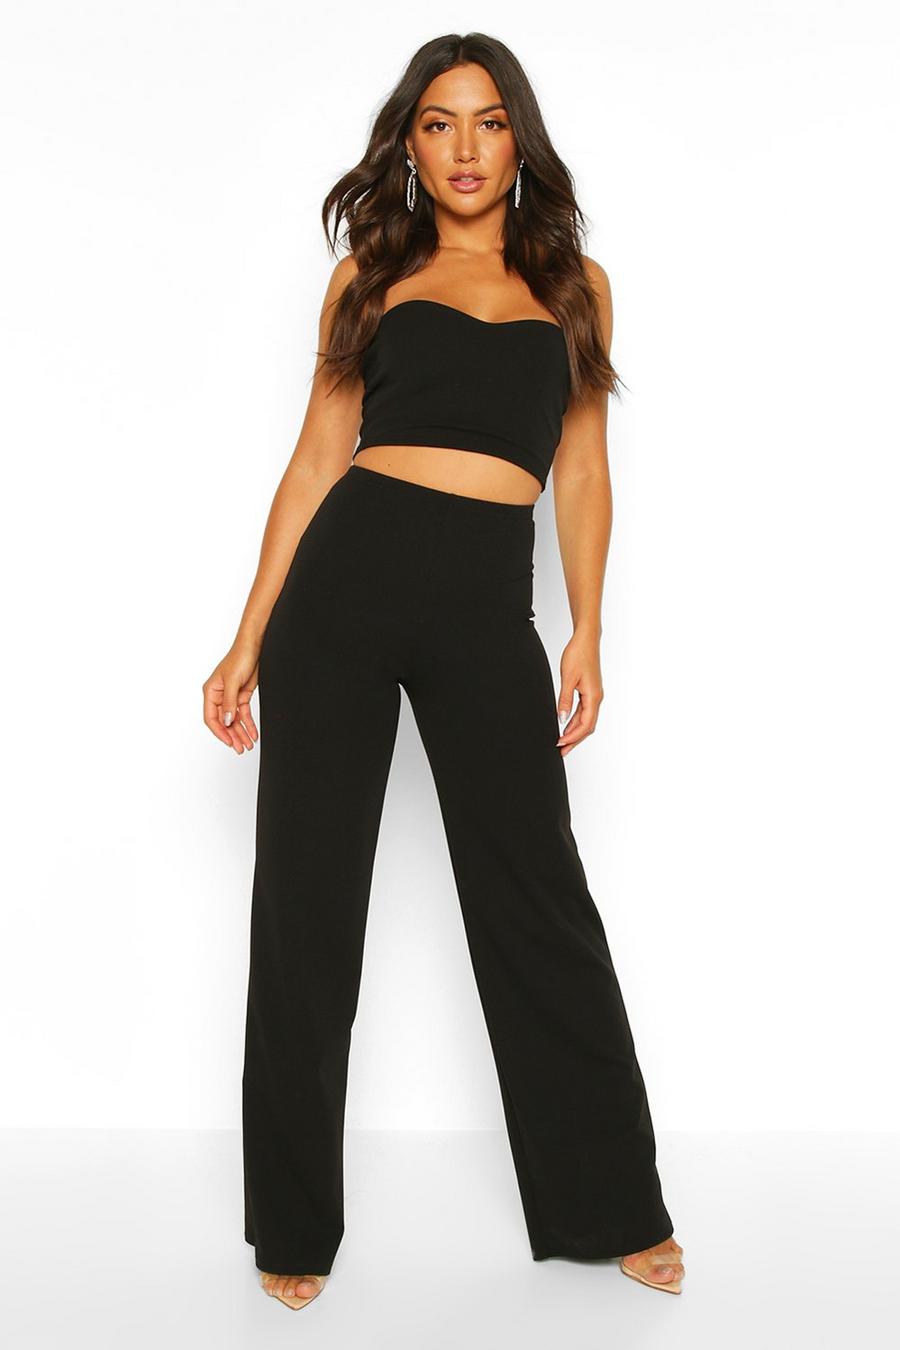 ASOS LUXE Lounge bandeau and legging set in black